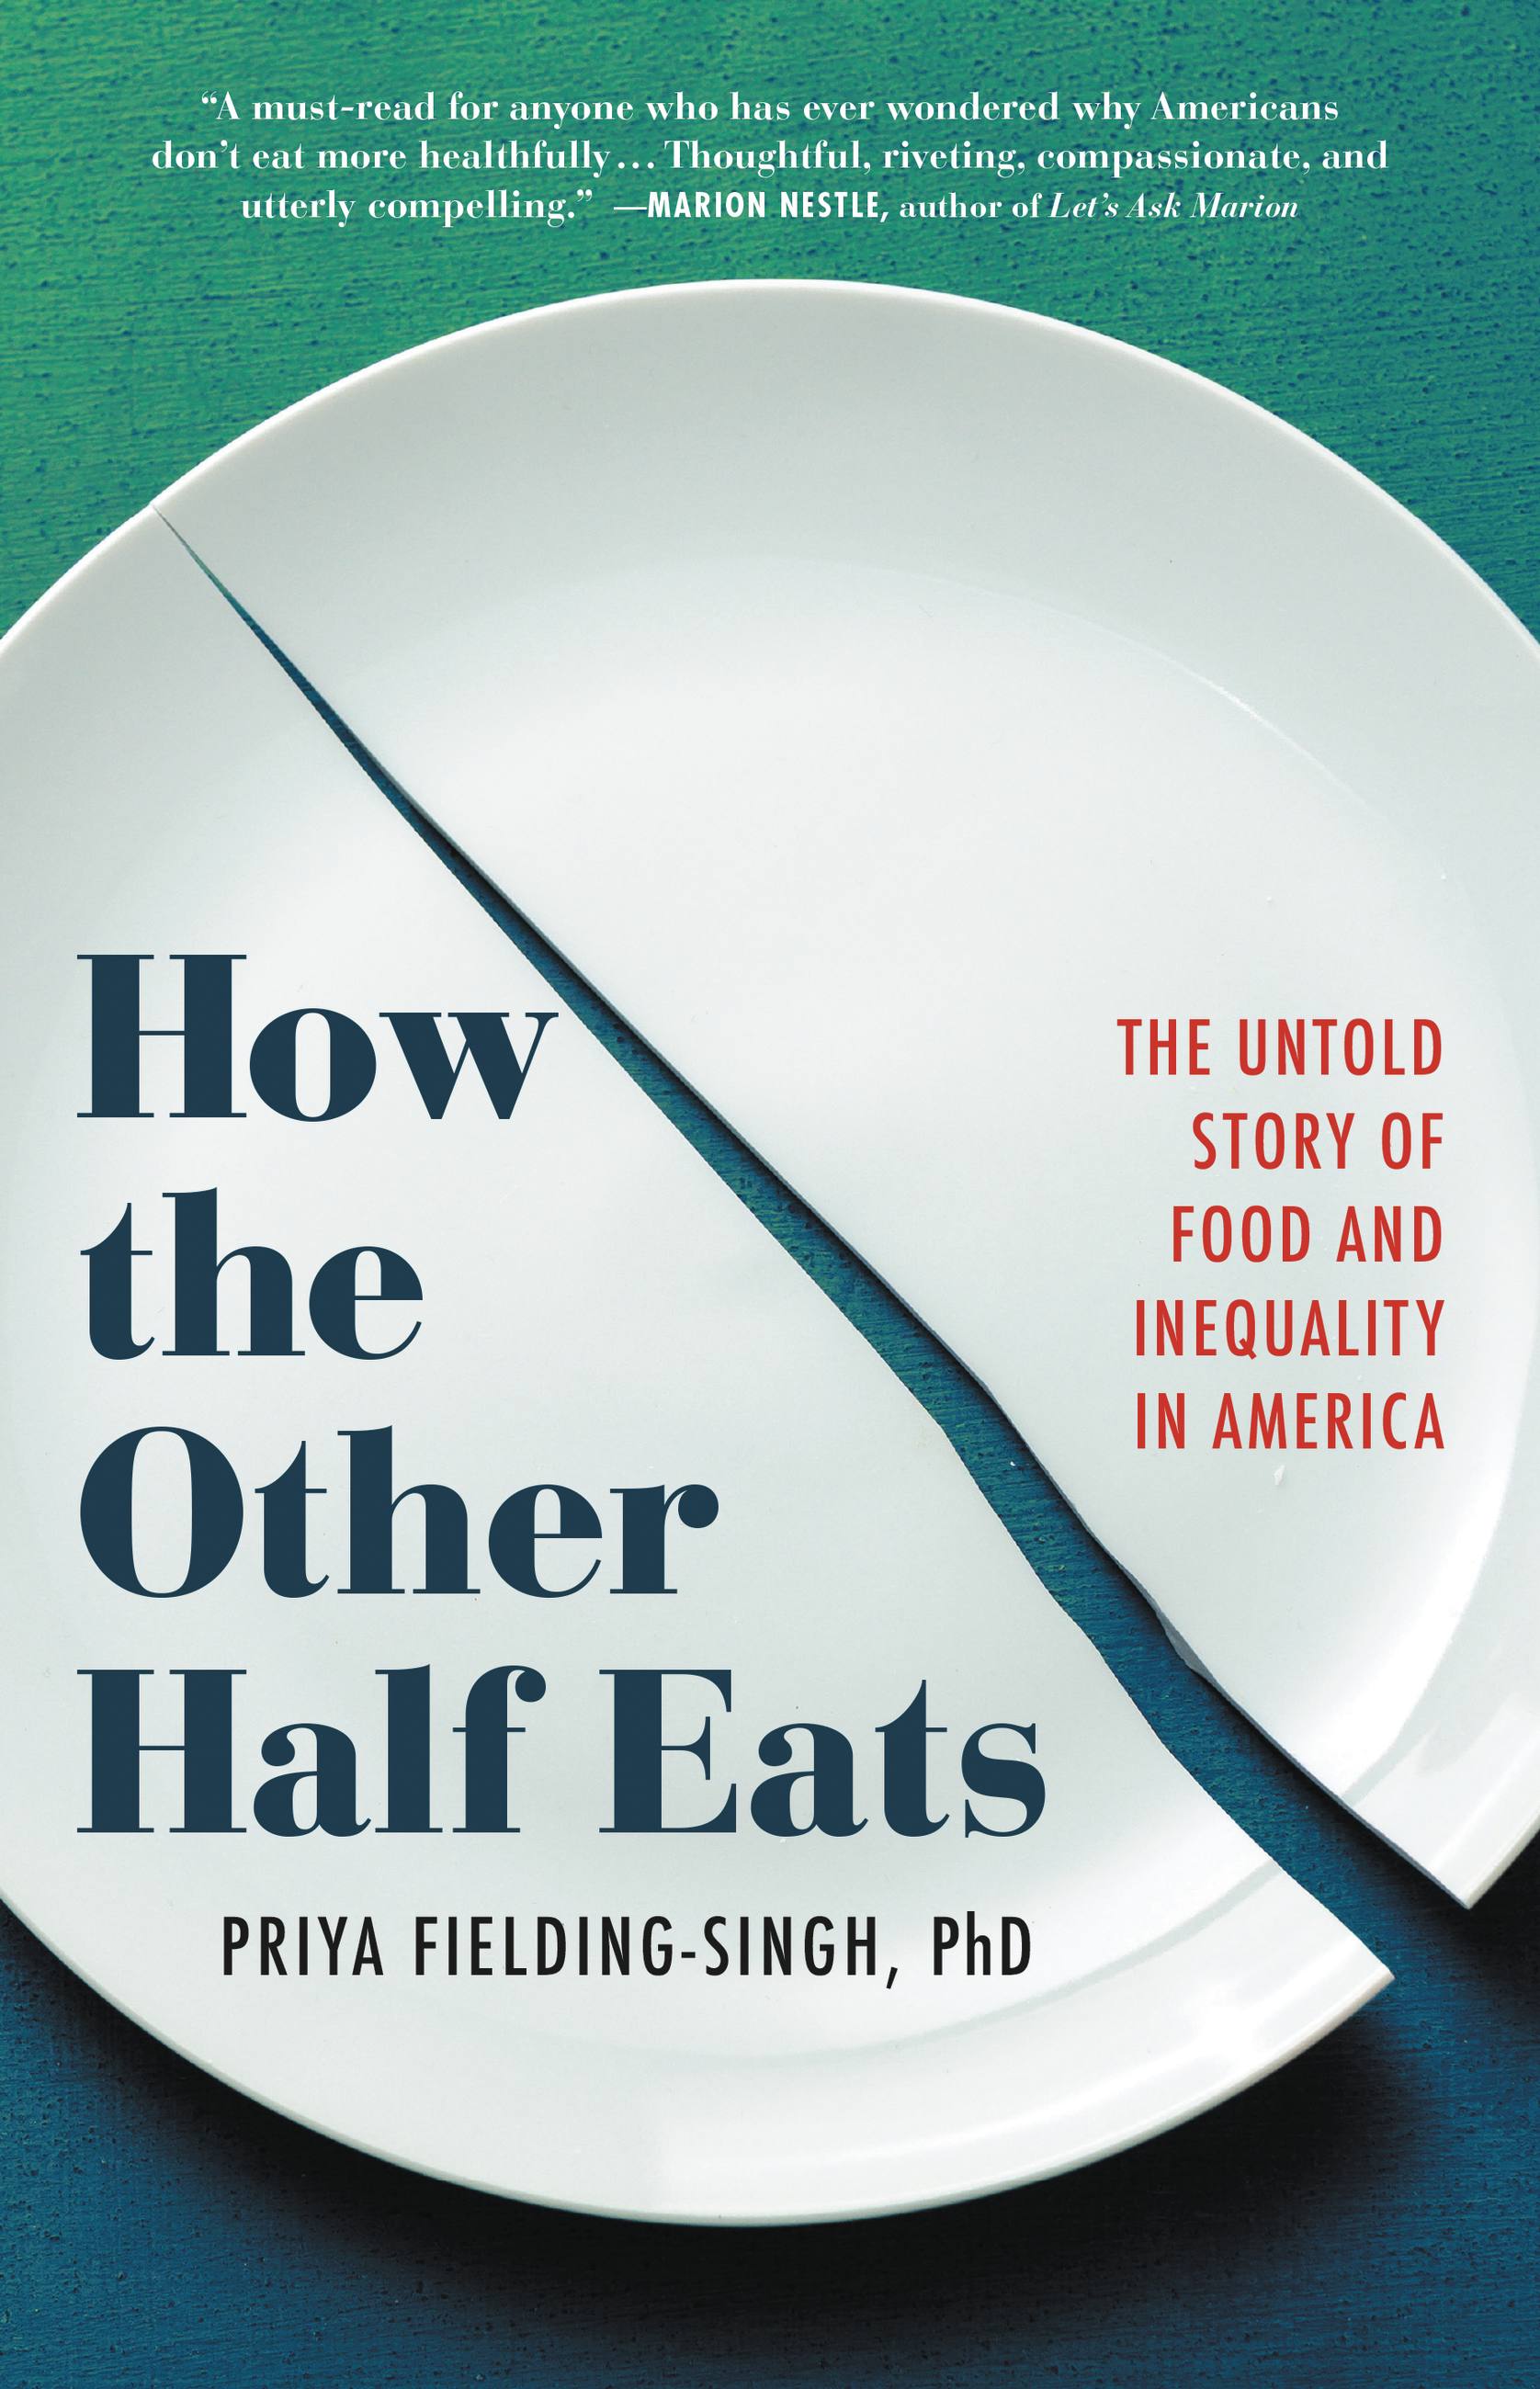 How the Other Half Eats by Priya Fielding-Singh, PhD Hachette Book Group